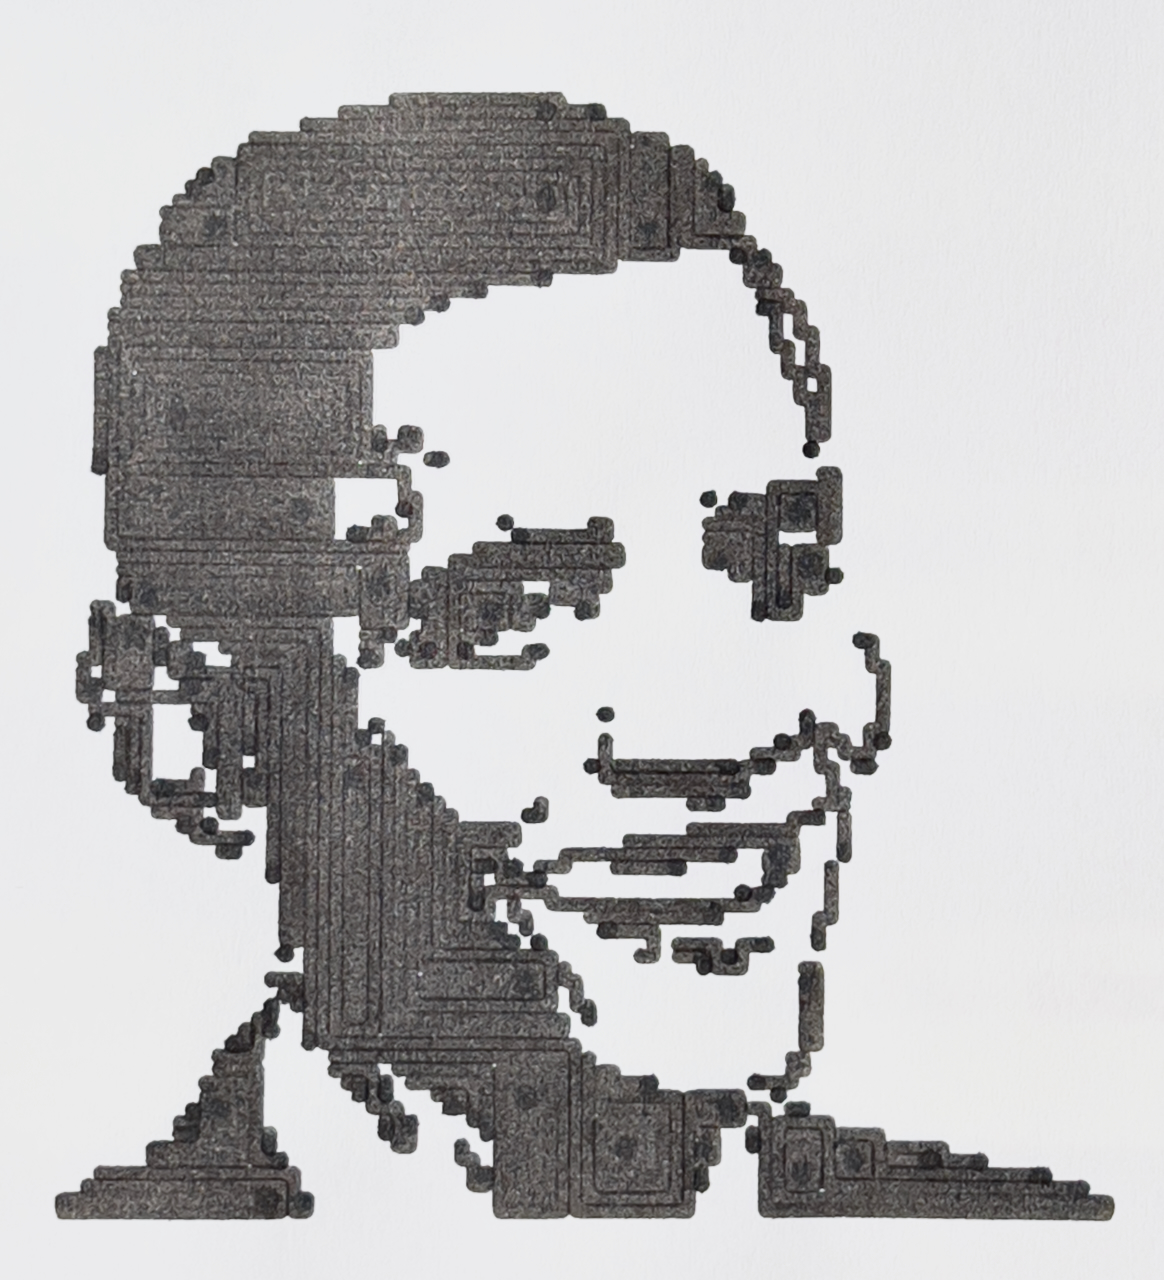 plotted obama pixelart with visibly overlap between neighbouring lines